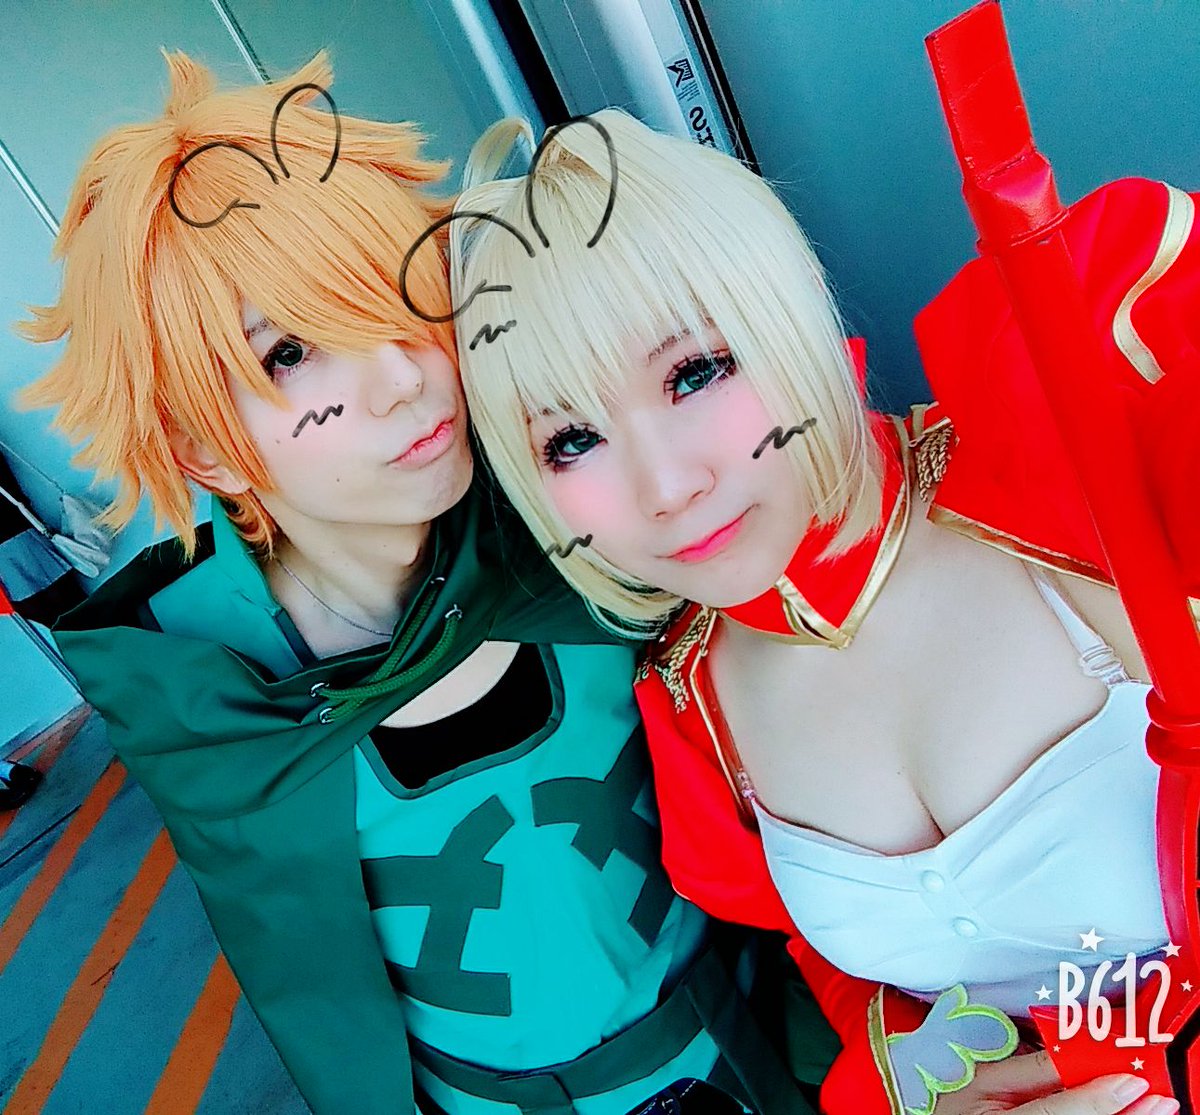 Anime Japan 2018 Cos Images Tickets Impressions Performers Tokyo Big Sight Story Viewer Hentai Cosplay